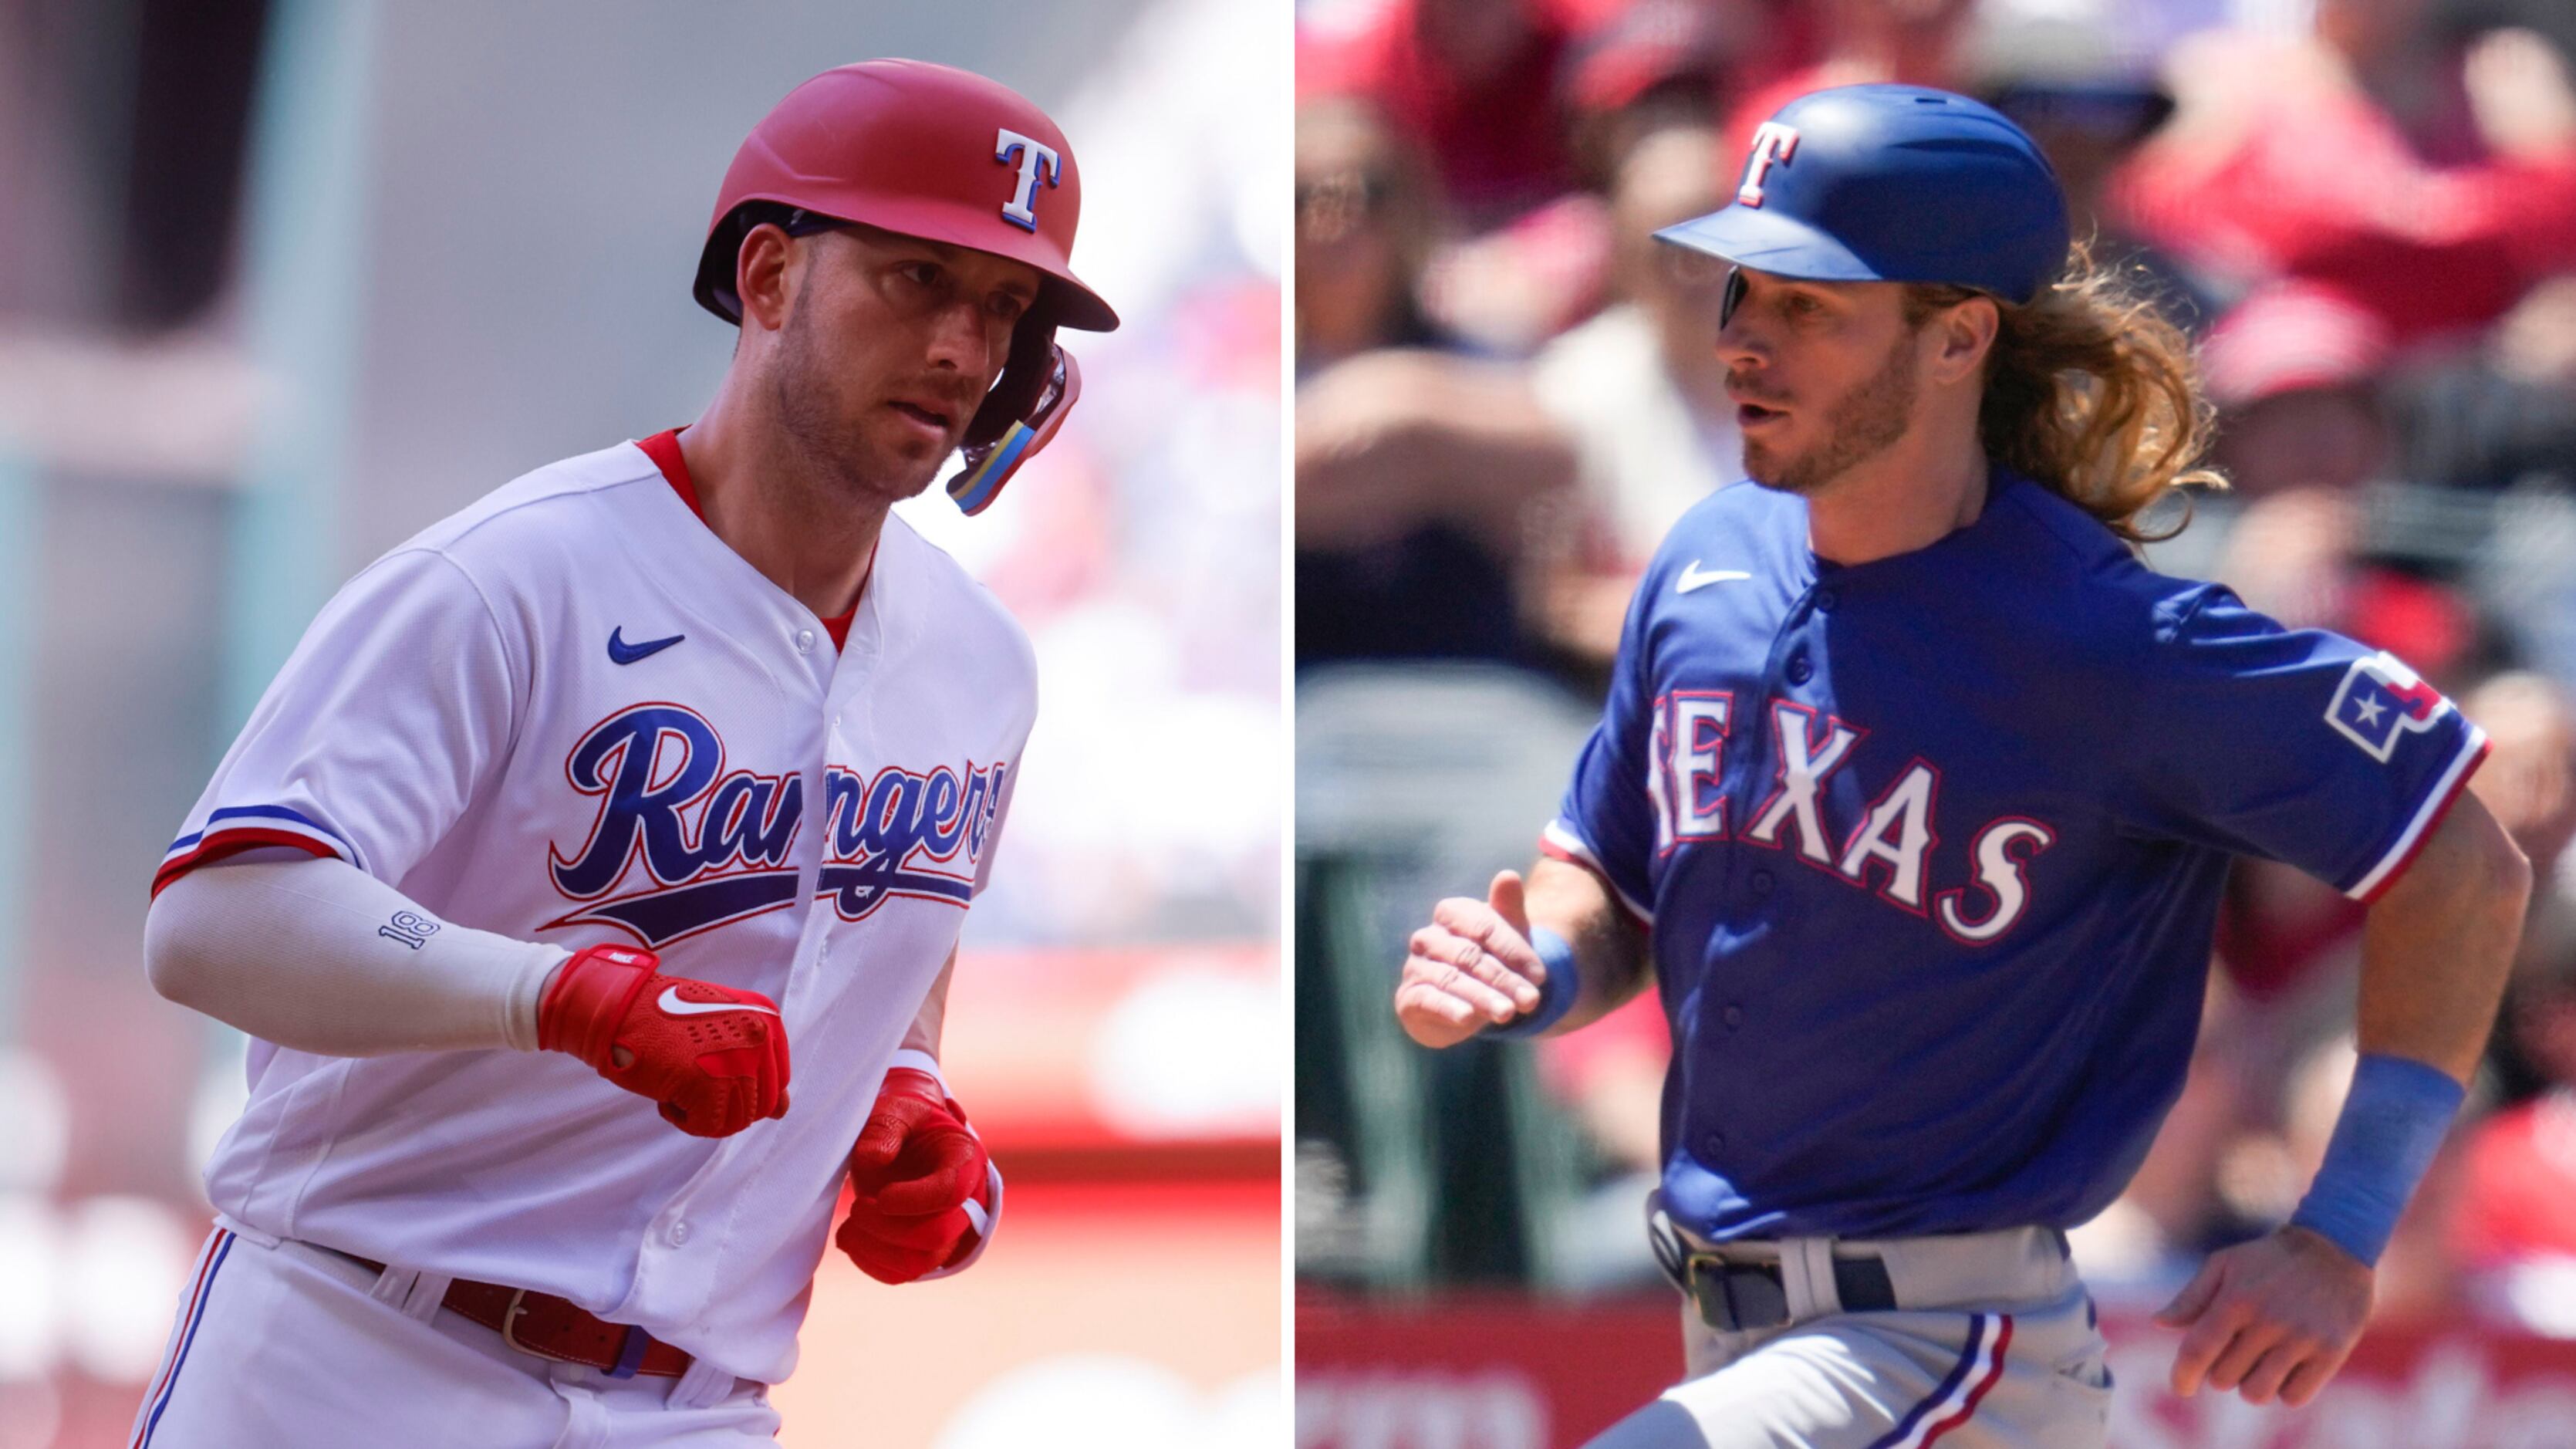 Rangers close in on rehab assignments for catcher Mitch Garver, OF